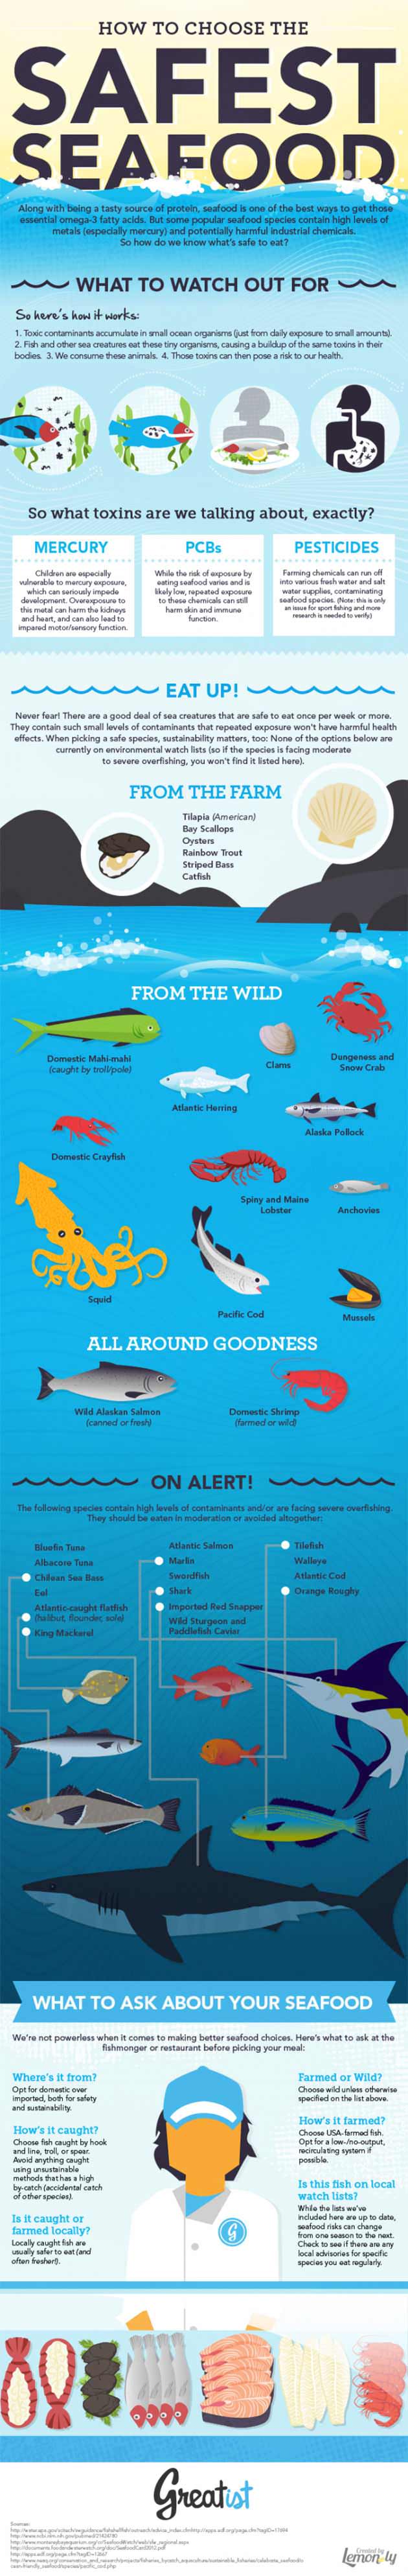 How to Choose the Safest Seafood Infographic